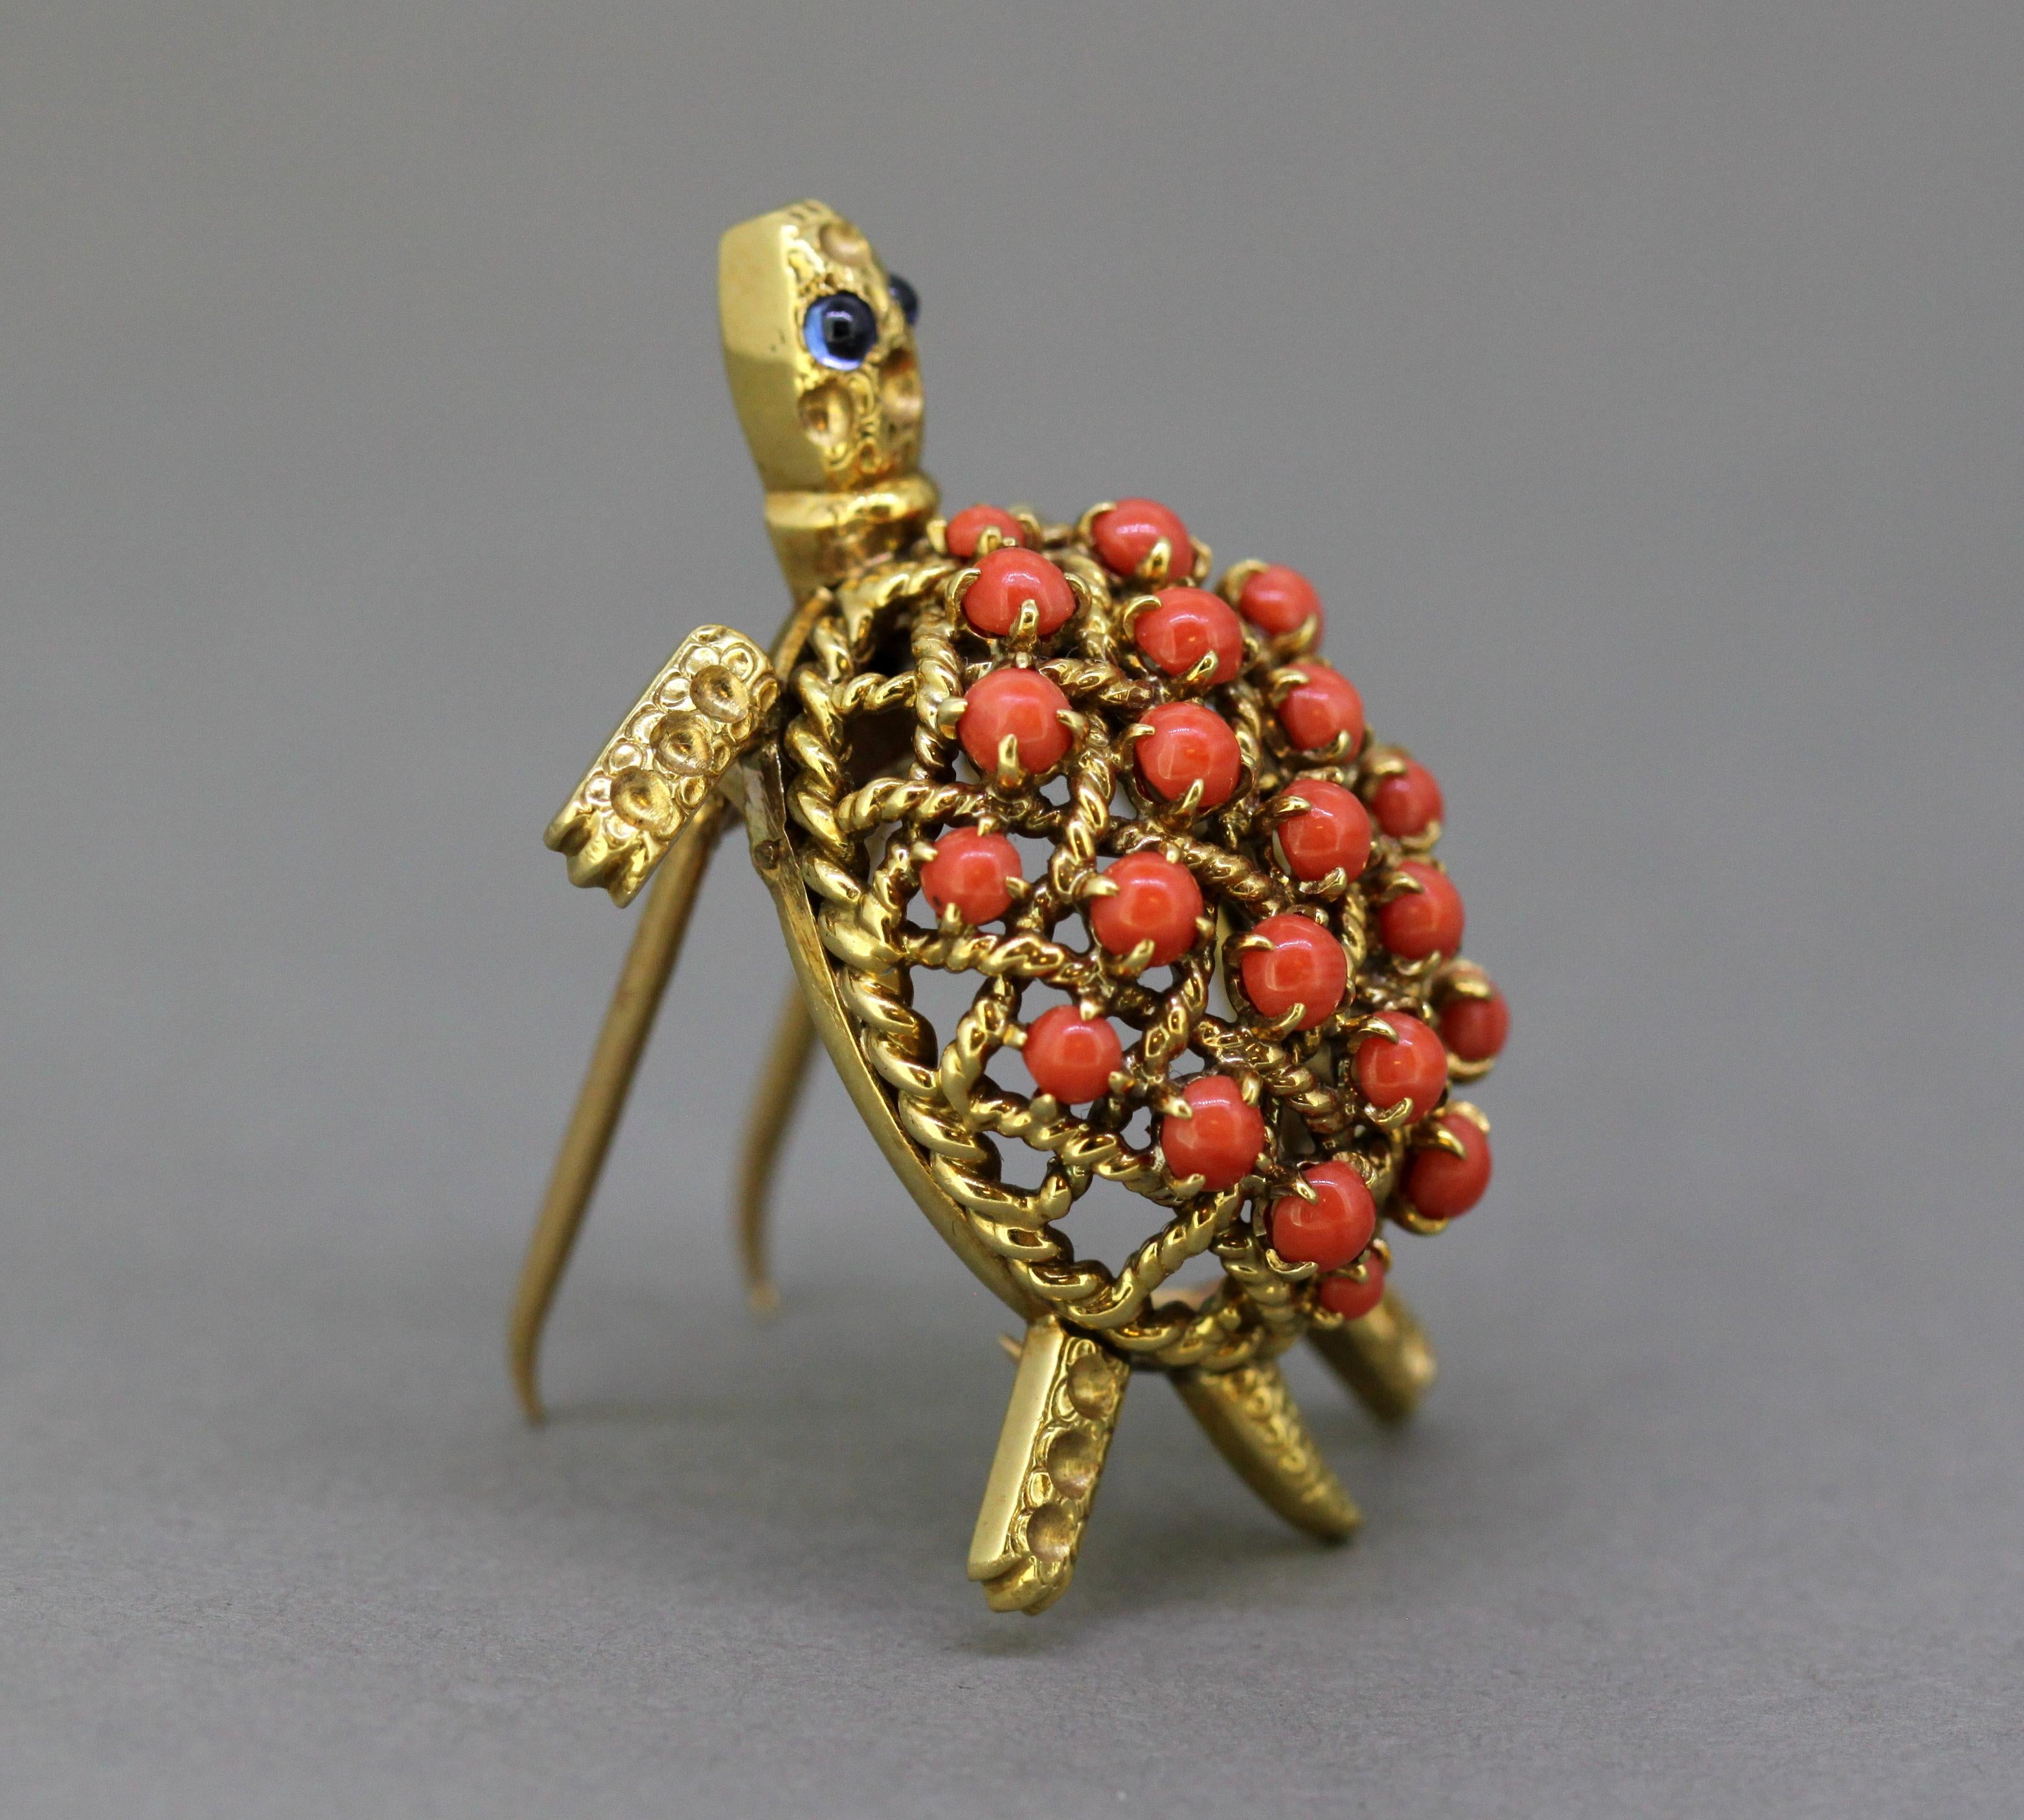 18k gold turtle brooch with natural coral and blue sapphires.
Designer: Cartier
Made in France Circa 1950's
Fully hallmarked. (Eagles head, Cartier, Paris)

Dimensions - 
Size : 3.9 x 2.7 x 1.5 cm
Weight : 15 grams

Coral - 
Cut : Round
Number of